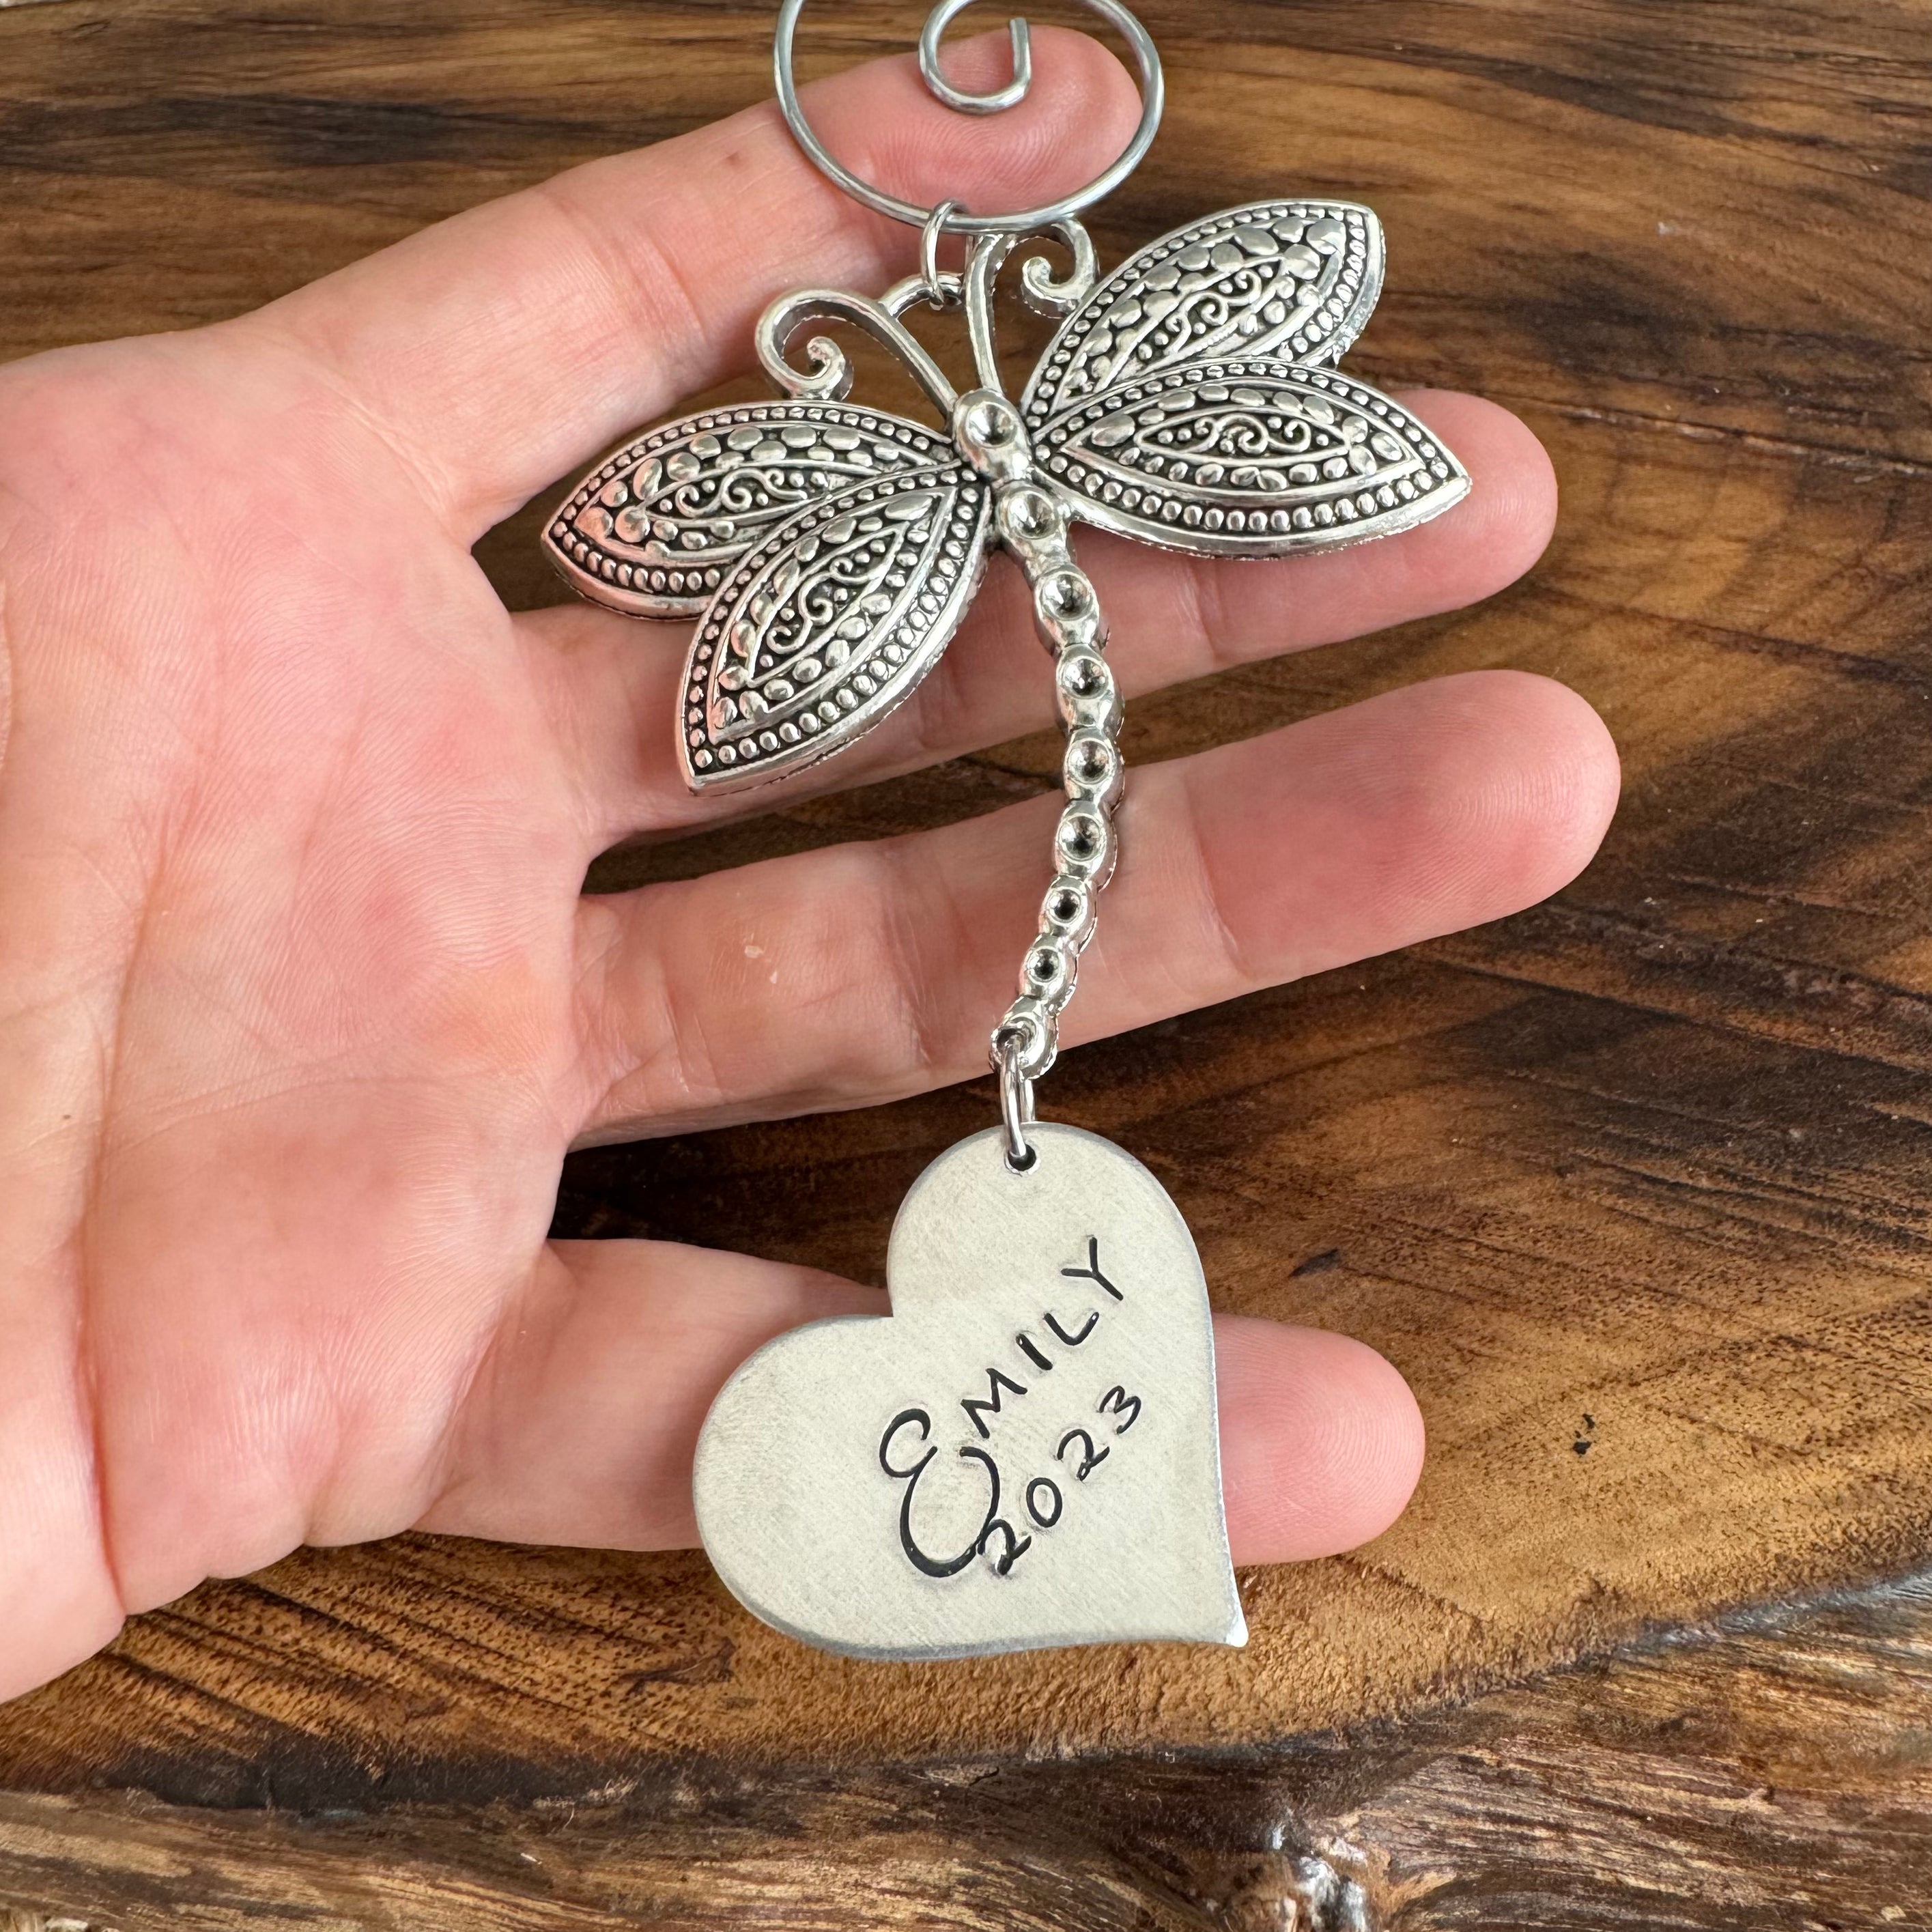 DRAGONFLY ORNAMENT WITH NAME, DATE OR WORD